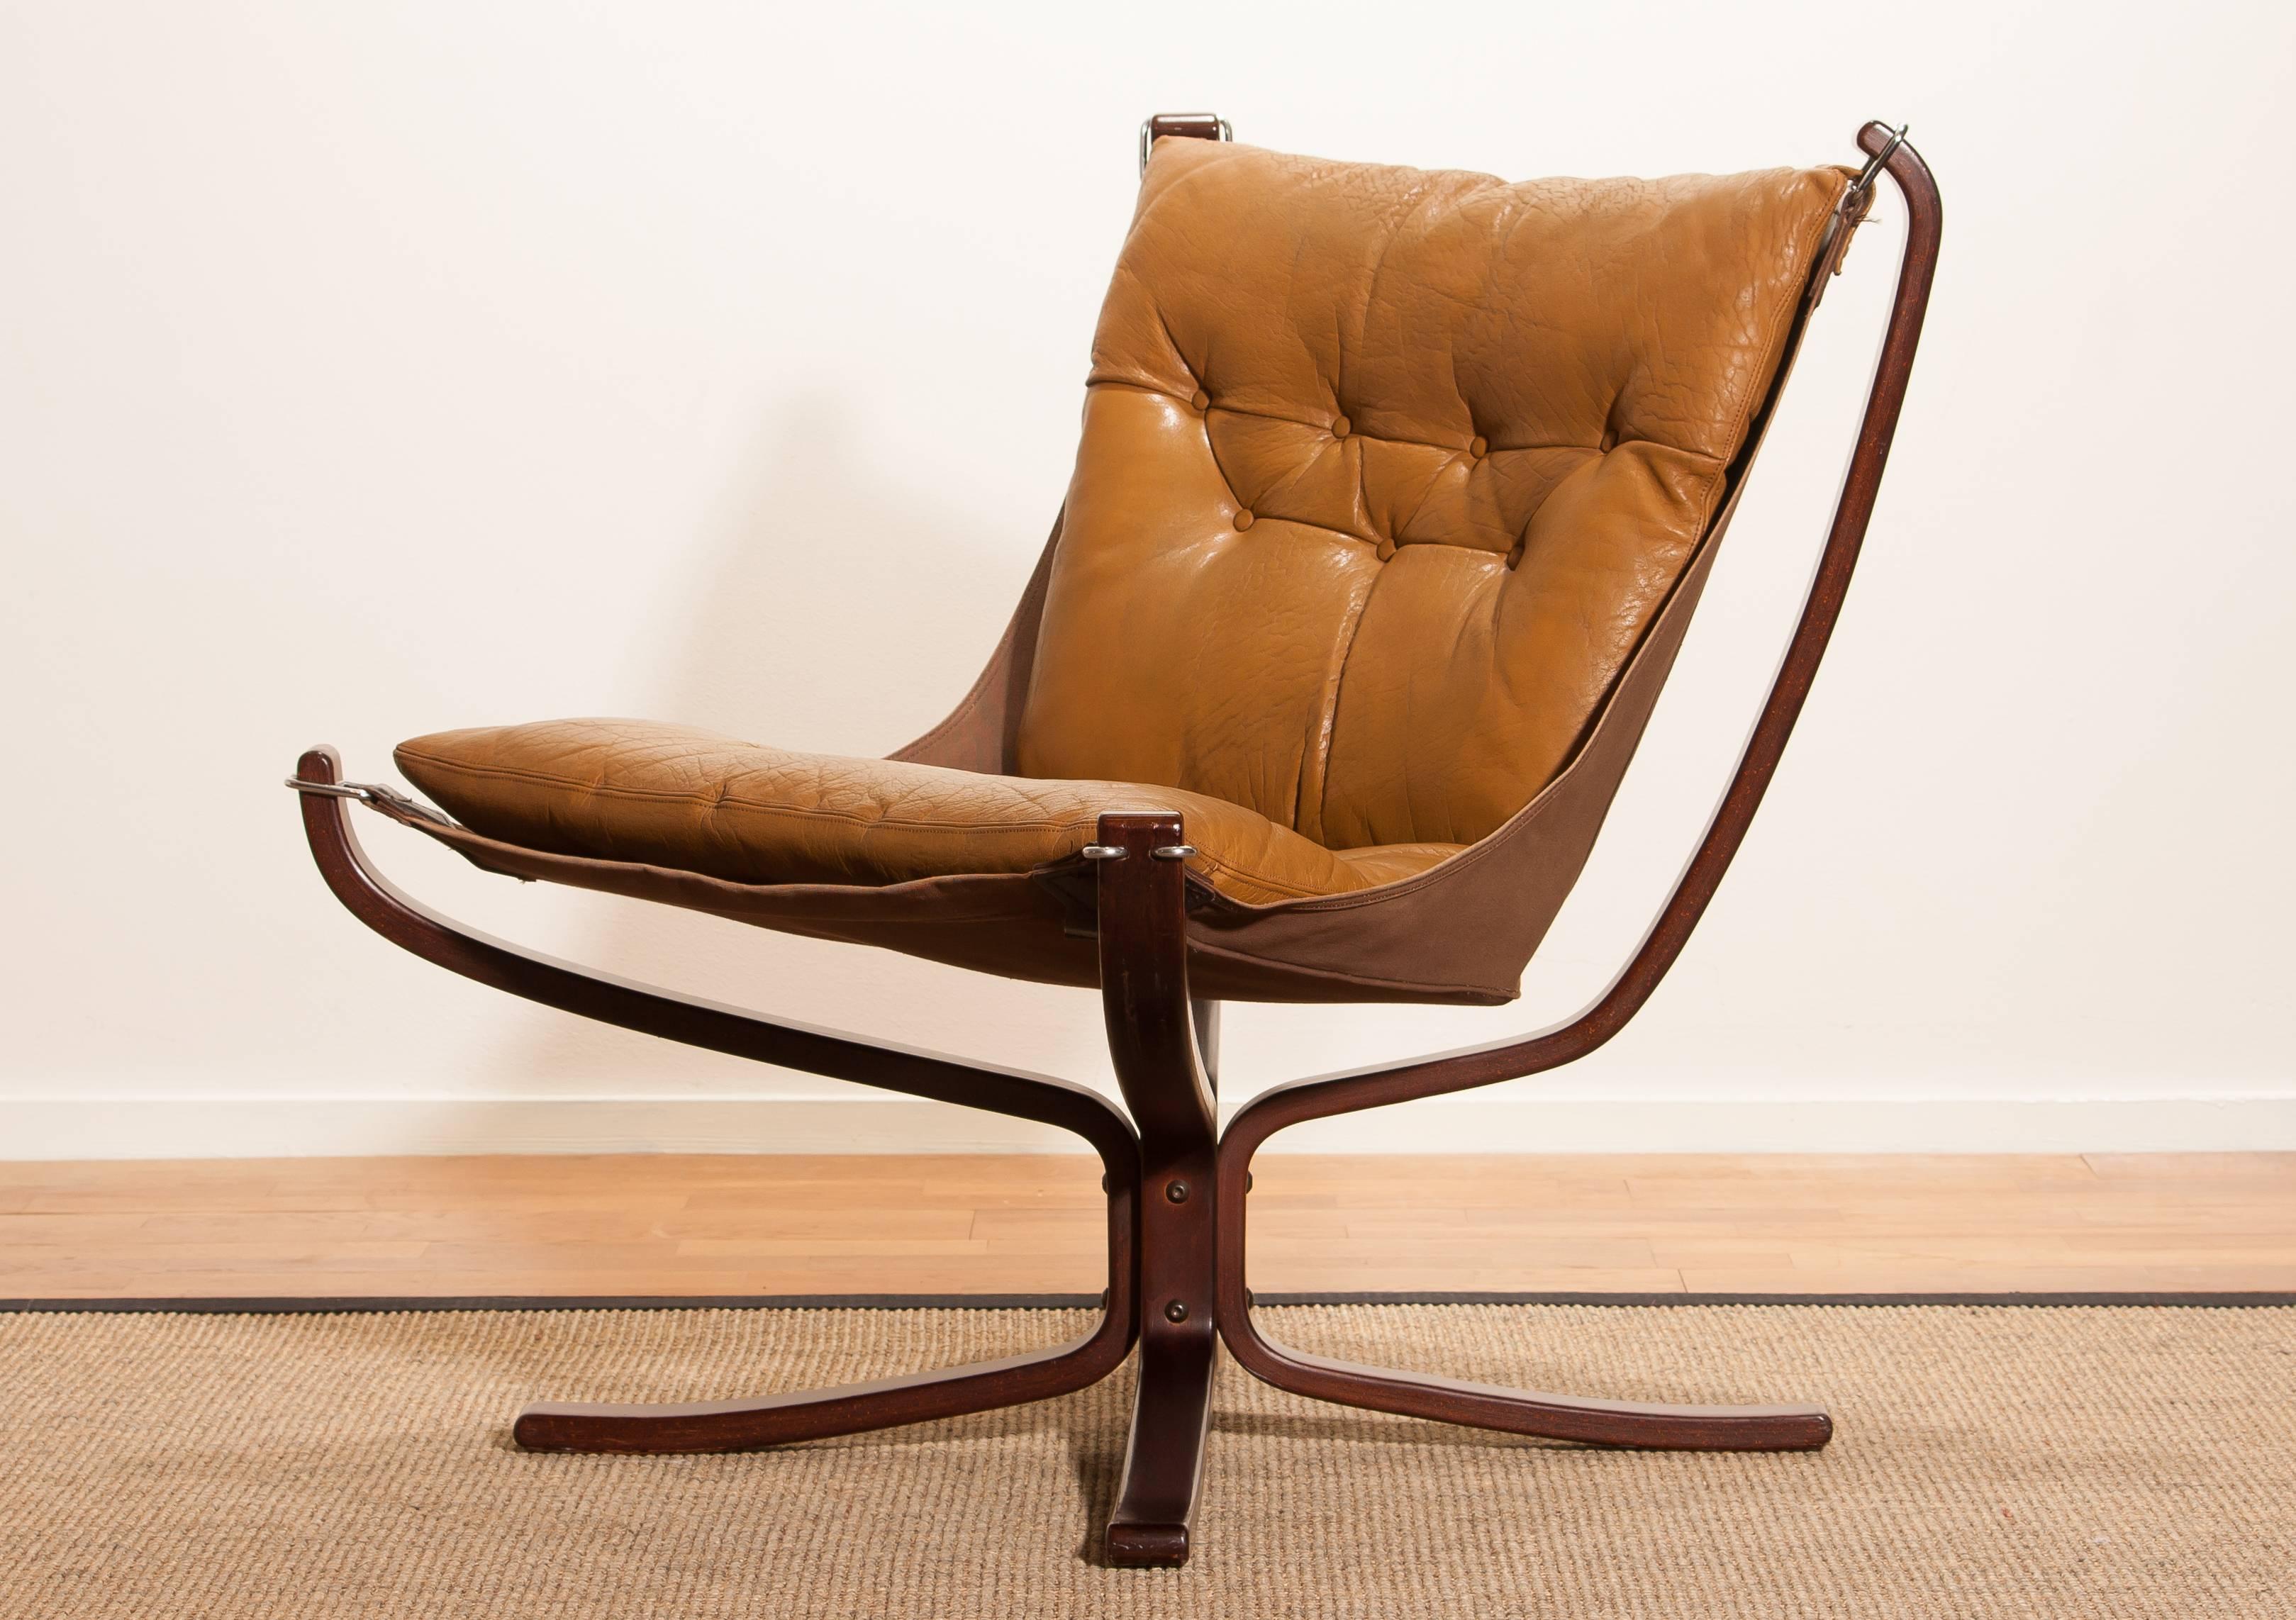 Wonderful armchair designed by Sigurd Ressell Norway.
The chair is in a very nice original condition.
Both, the camel leather seating as the wooden frame are in excellent condition.
Period 1970s.
Dimensions: H 100 cm, W 80 cm, D 80 cm, SH 40